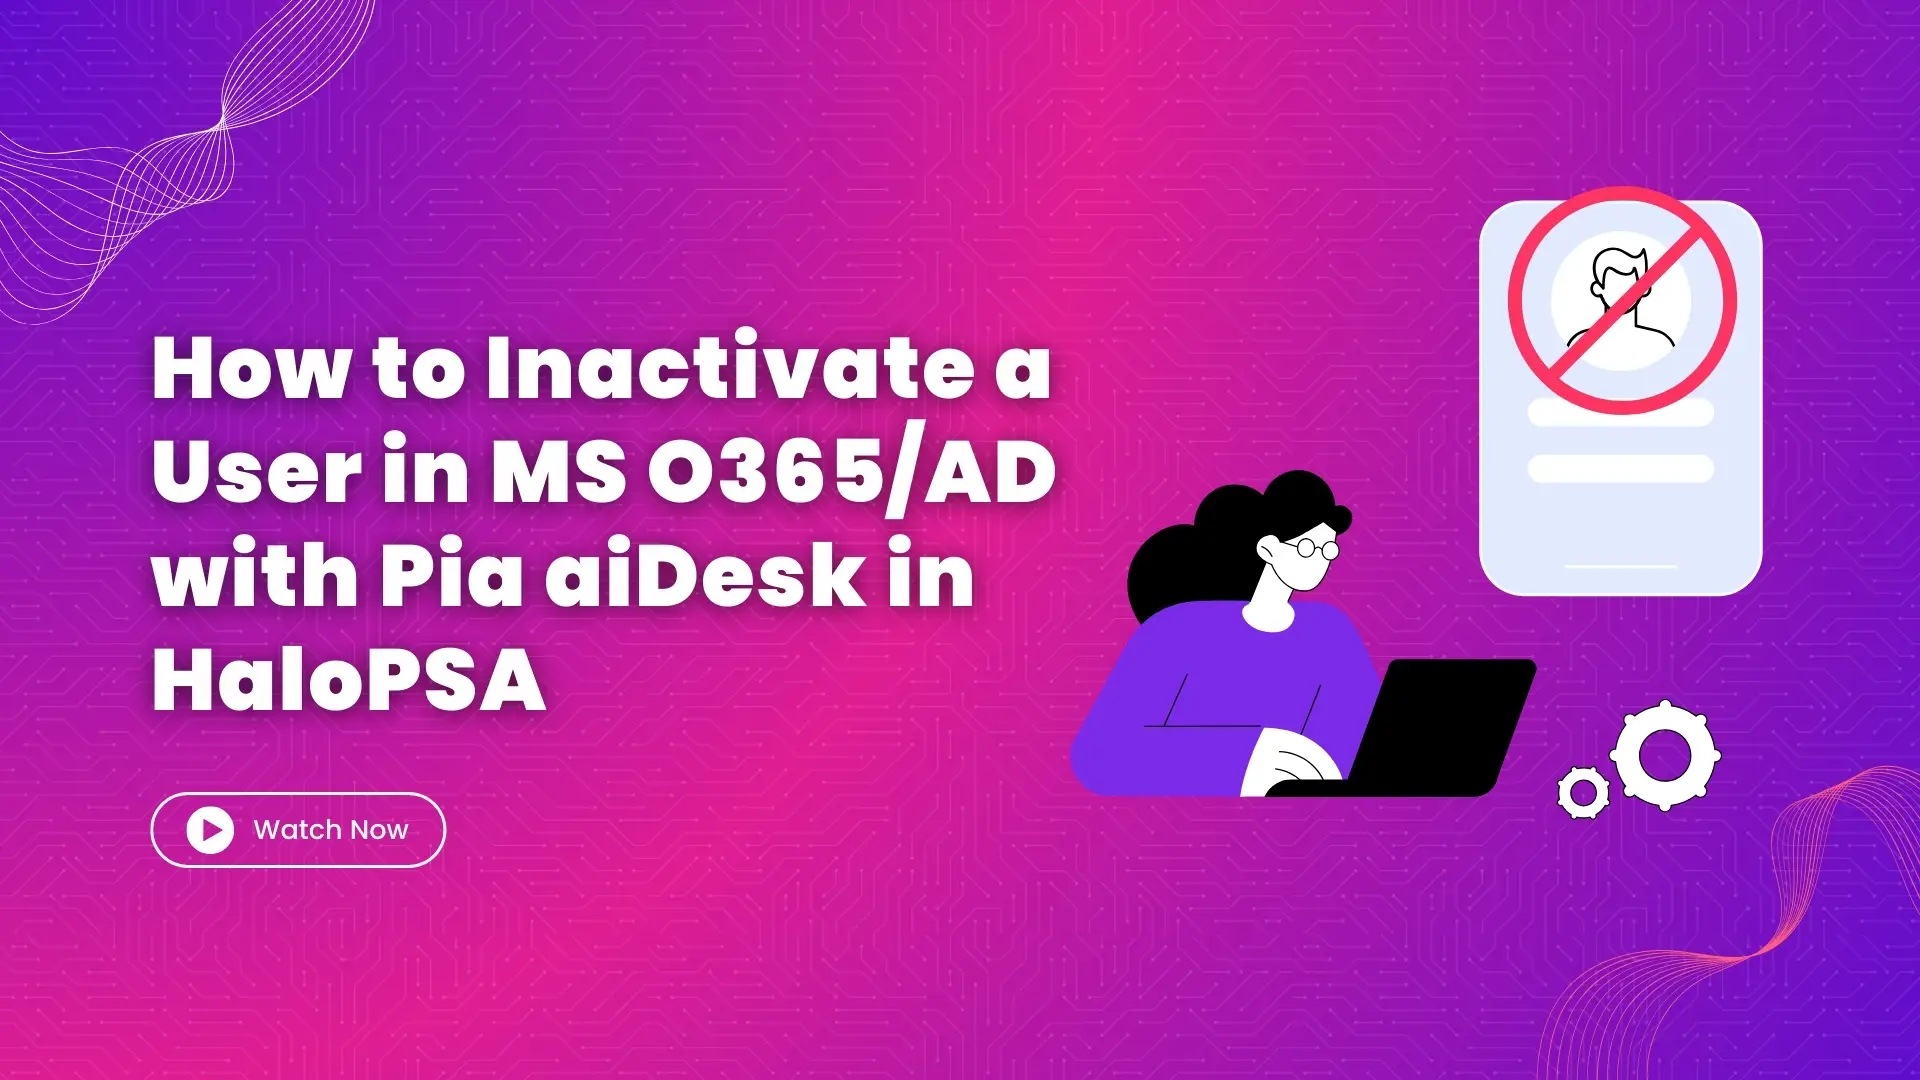 How to Inactivate a User in MS O365AD with Pia aiDesk in HaloPSA